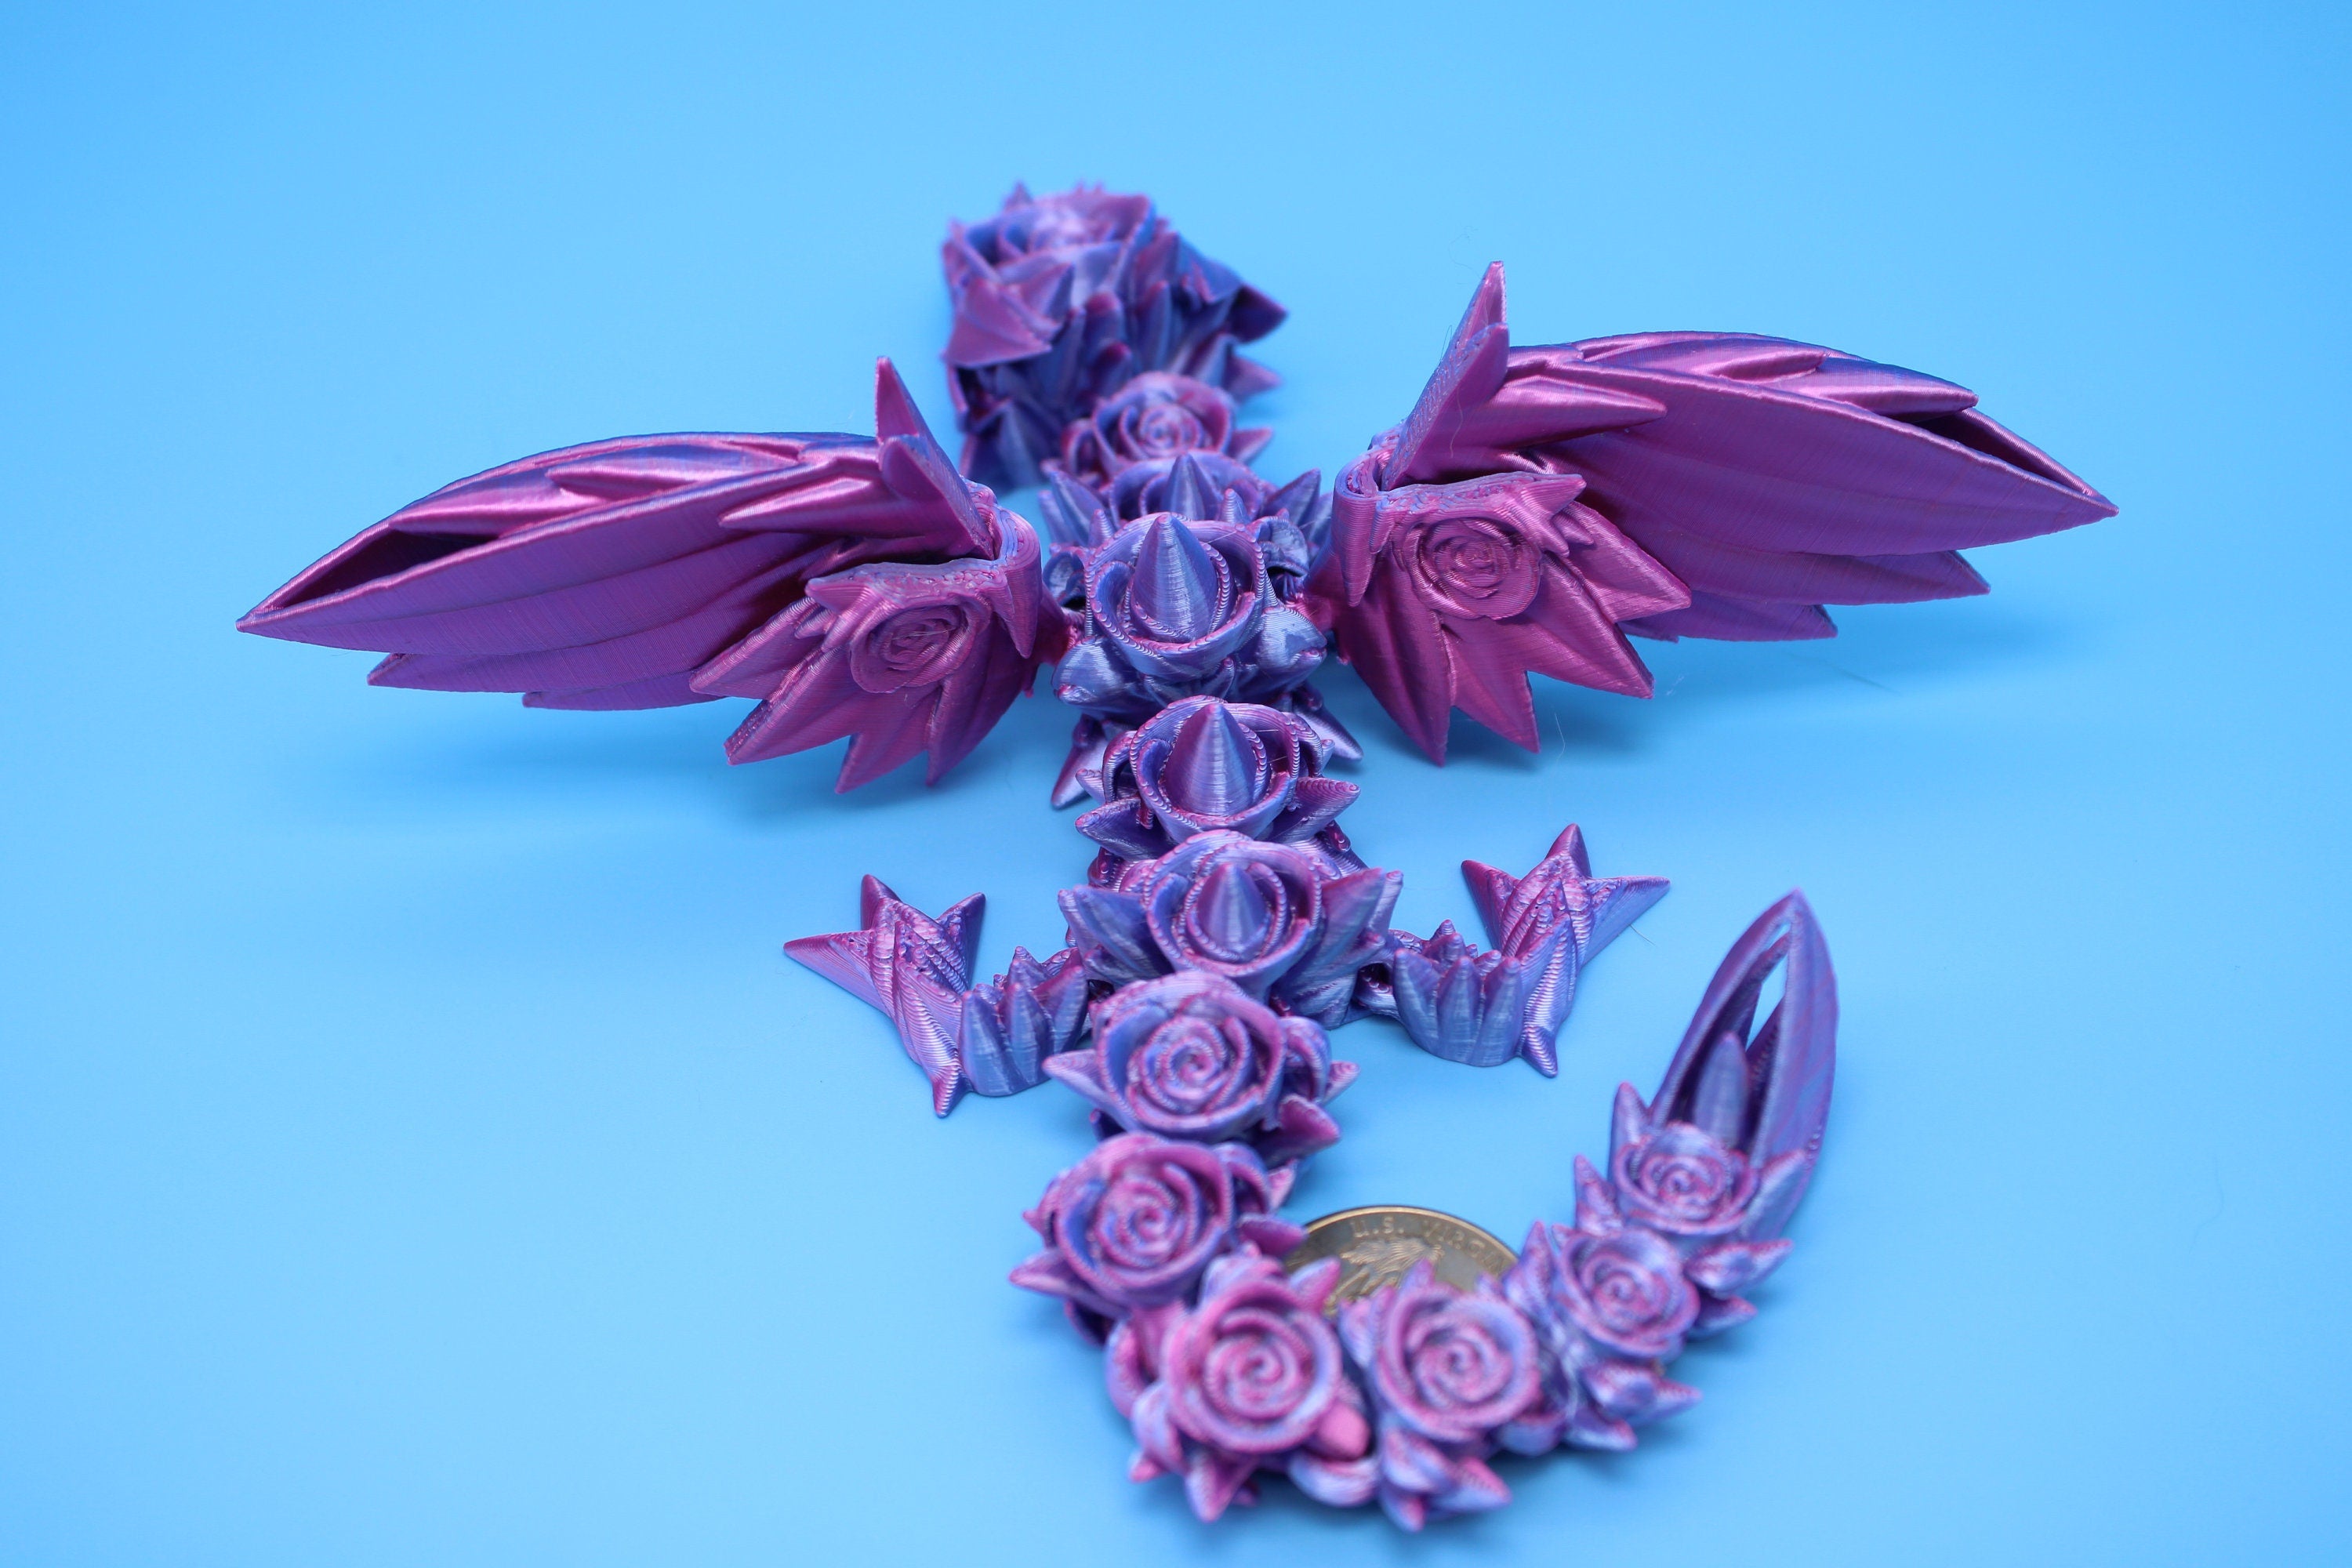 Baby Rose Wing Dragon | Blue / Pink | 3D Printed | Fidget | Flexi Toy 8.5 in. | Stress Relief Gift